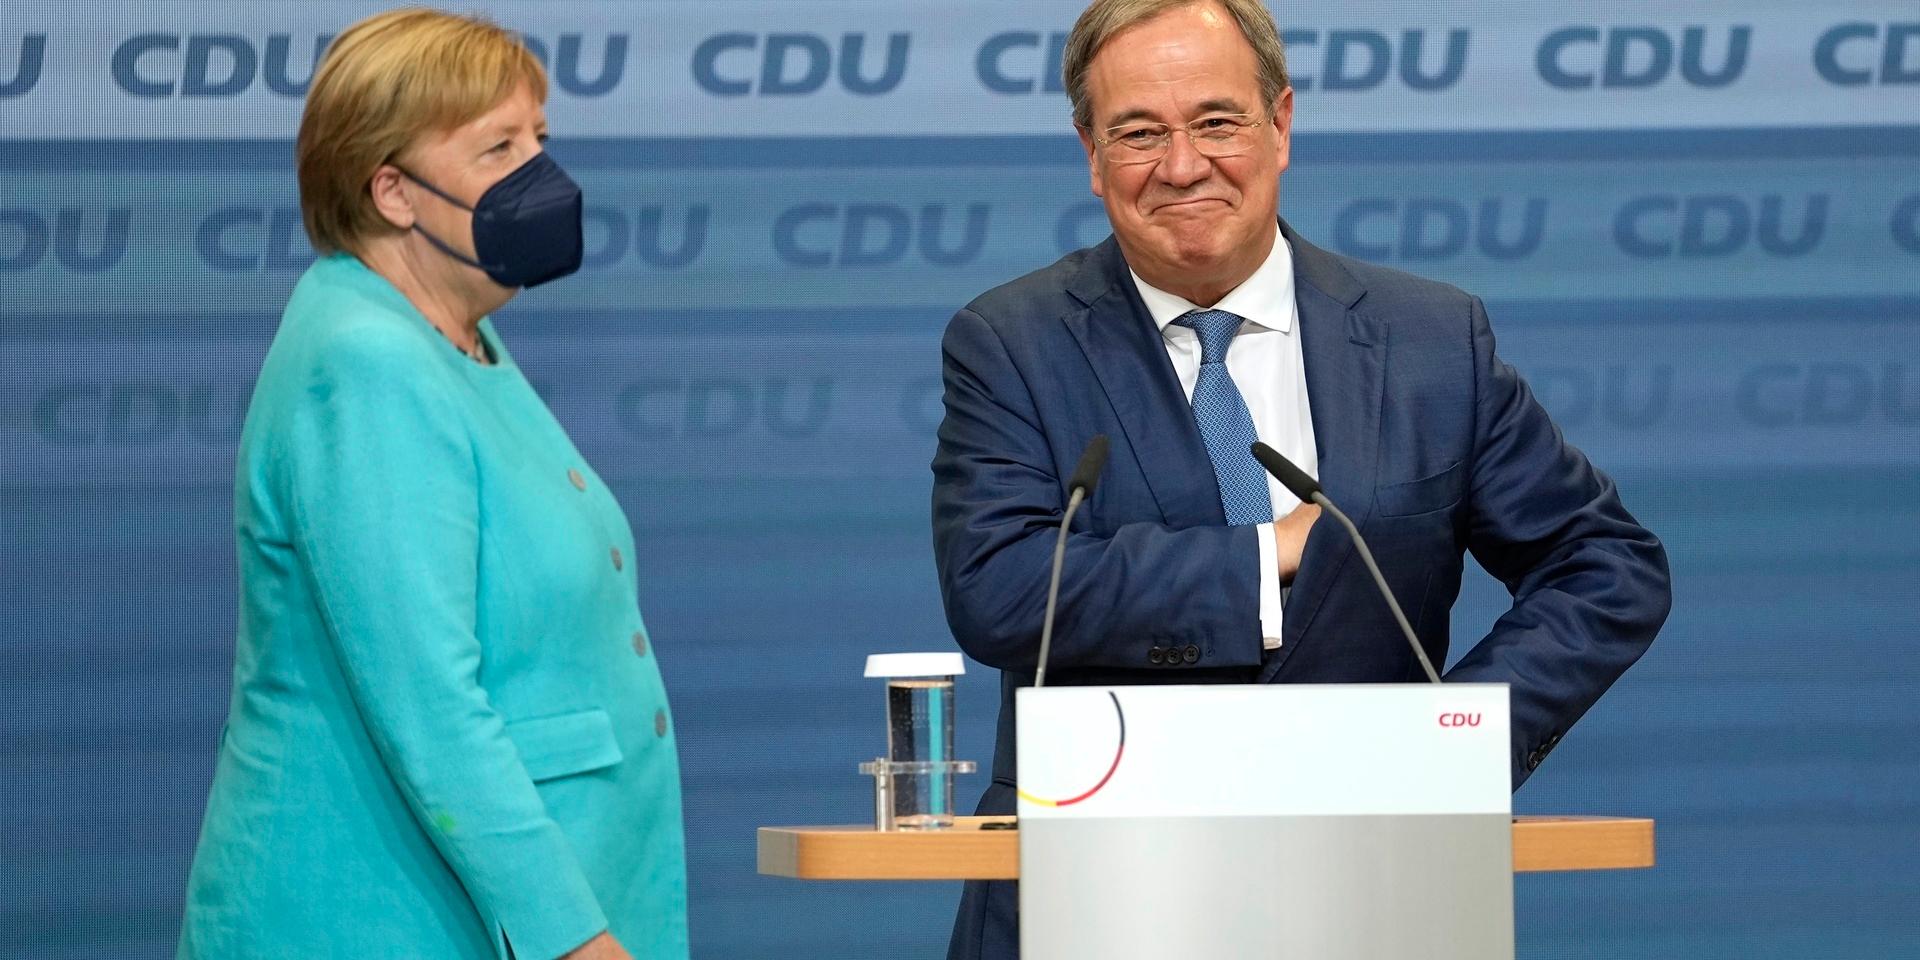 Chancellor Angela Merkel stands next to Governor Armin Laschet, right, the top CDU candidate after the German parliament elections at the Christian Democratic Union, CDU, party's headquarters in Berlin, Sunday, Sept. 26, 2021. German voters are choosing a new parliament in an election that will determine who succeeds Chancellor Angela Merkel after her 16 years at the helm of Europe's biggest economy. (AP Photo/Martin Meissner)  XVG112